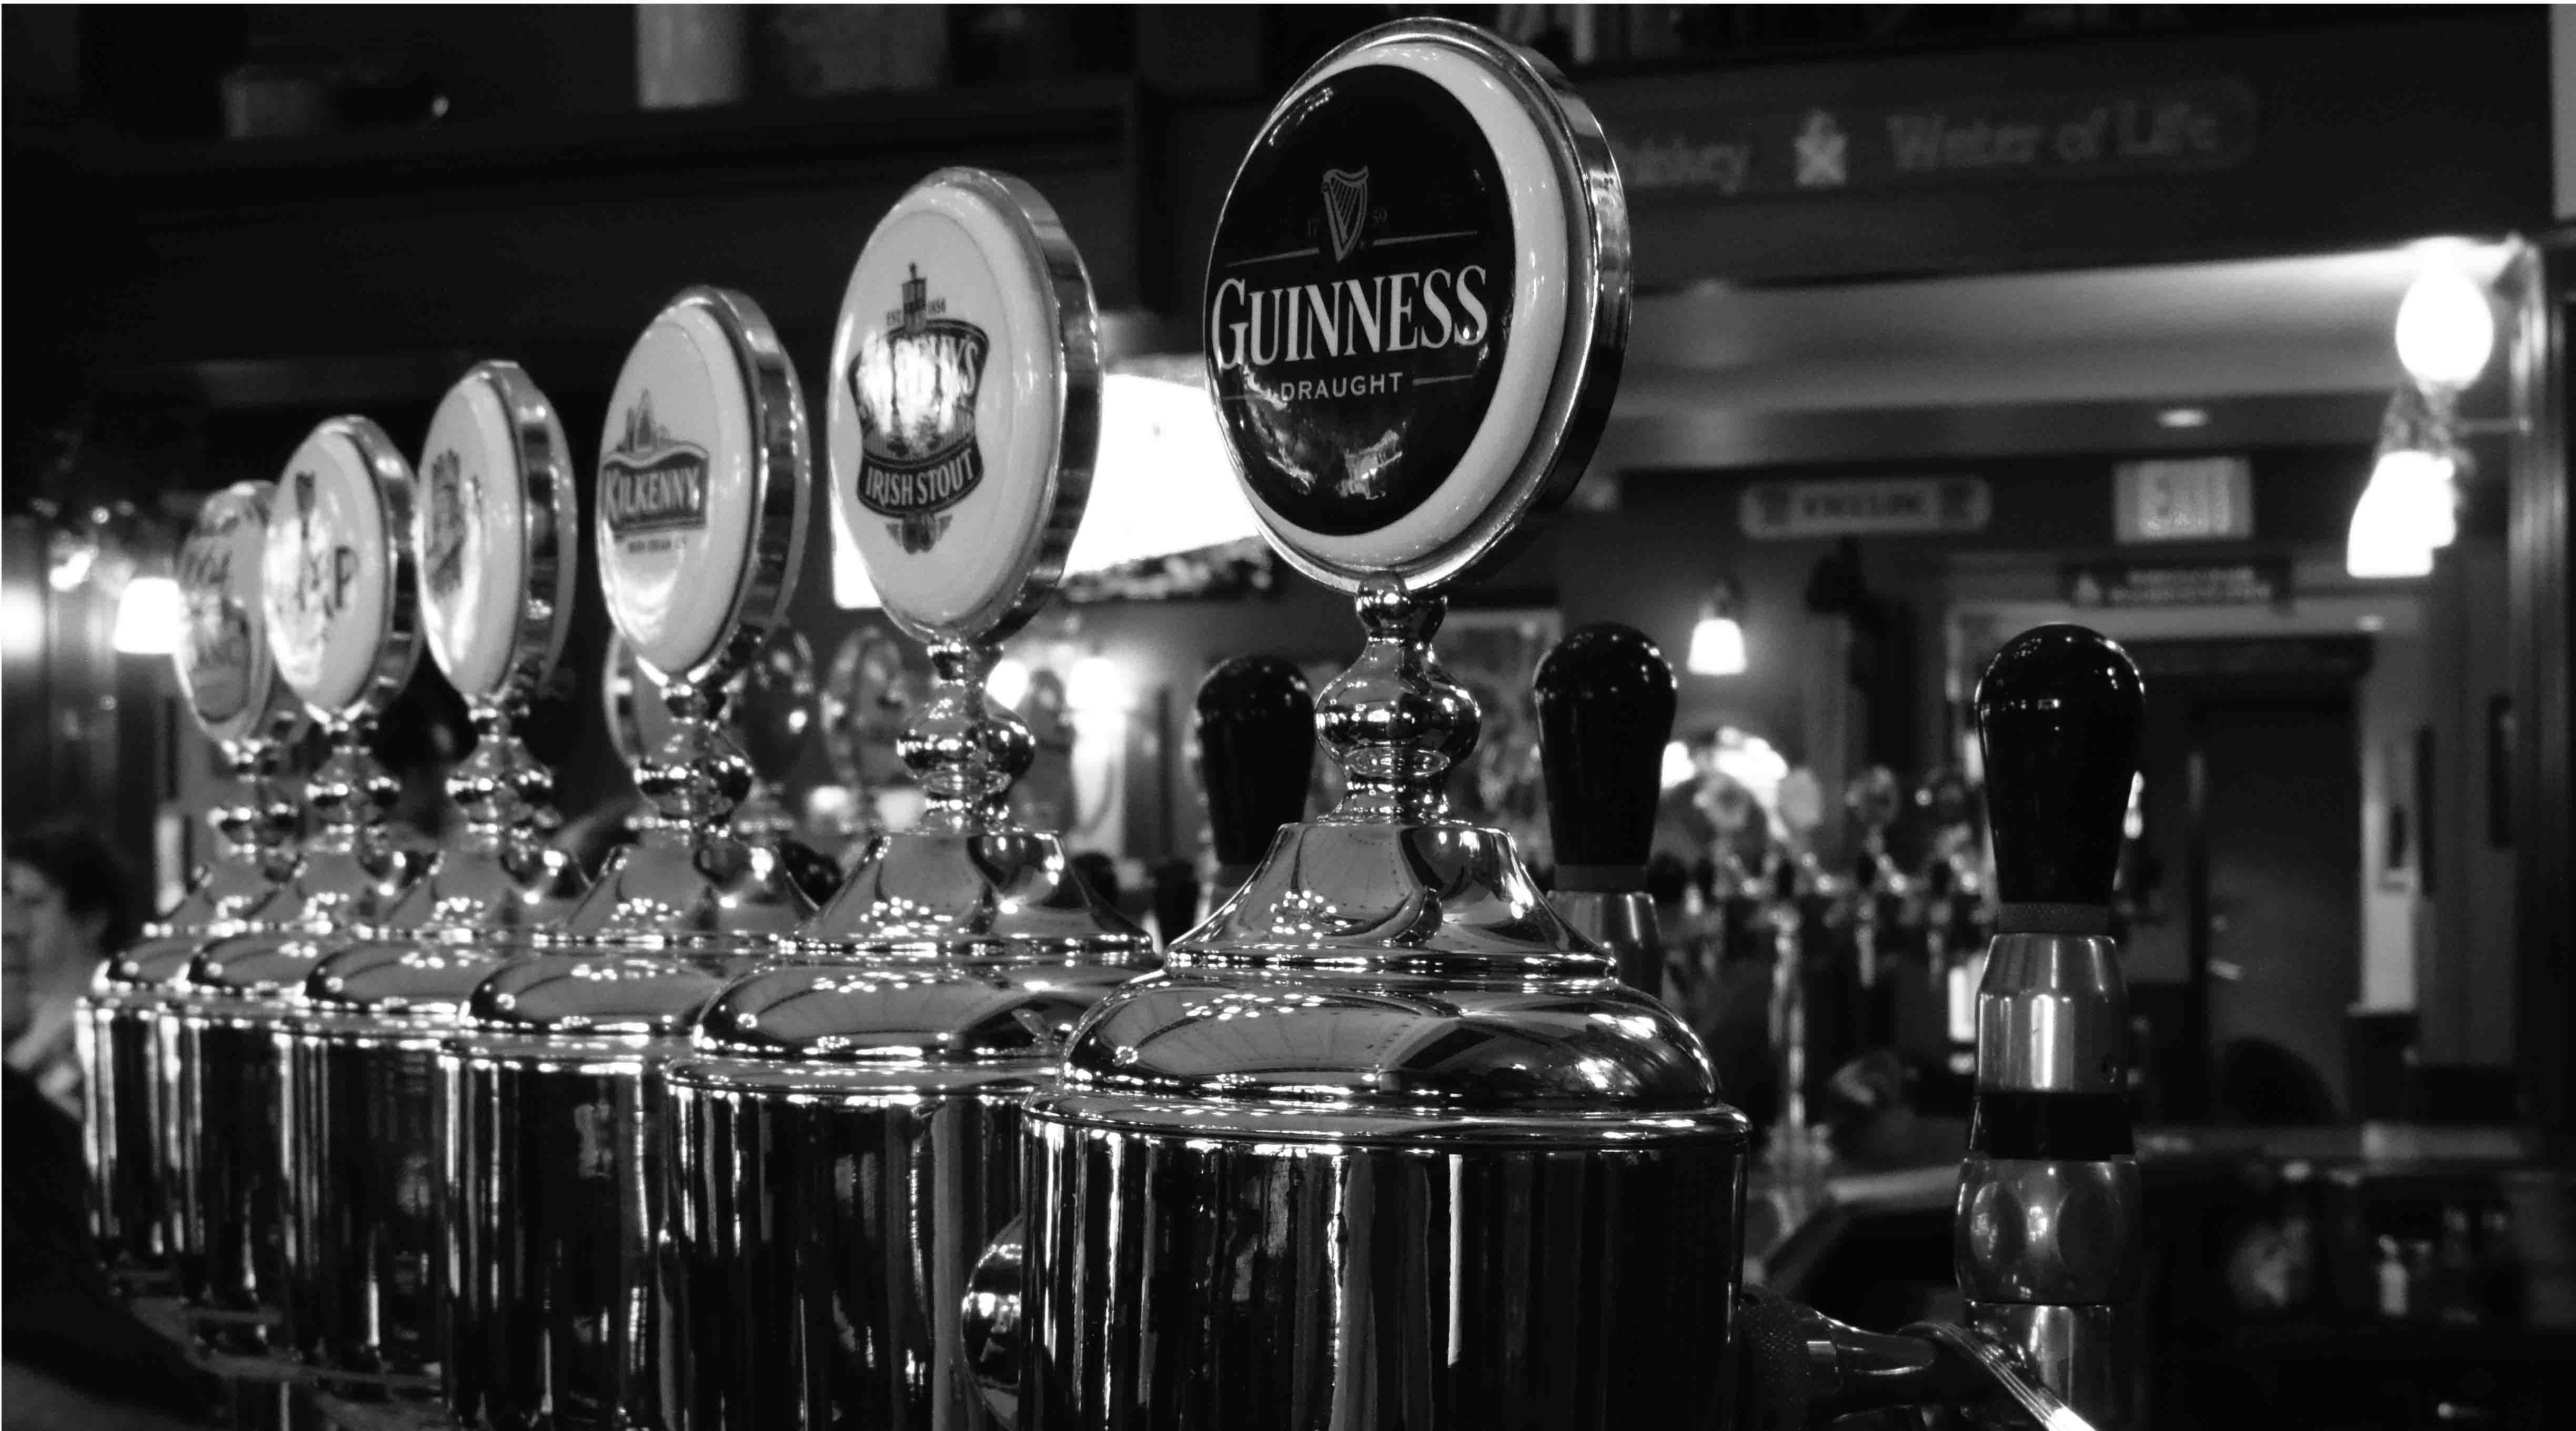 "The supply of pubs for sale will remain limited, at least in the first half of the year" - Lisney.